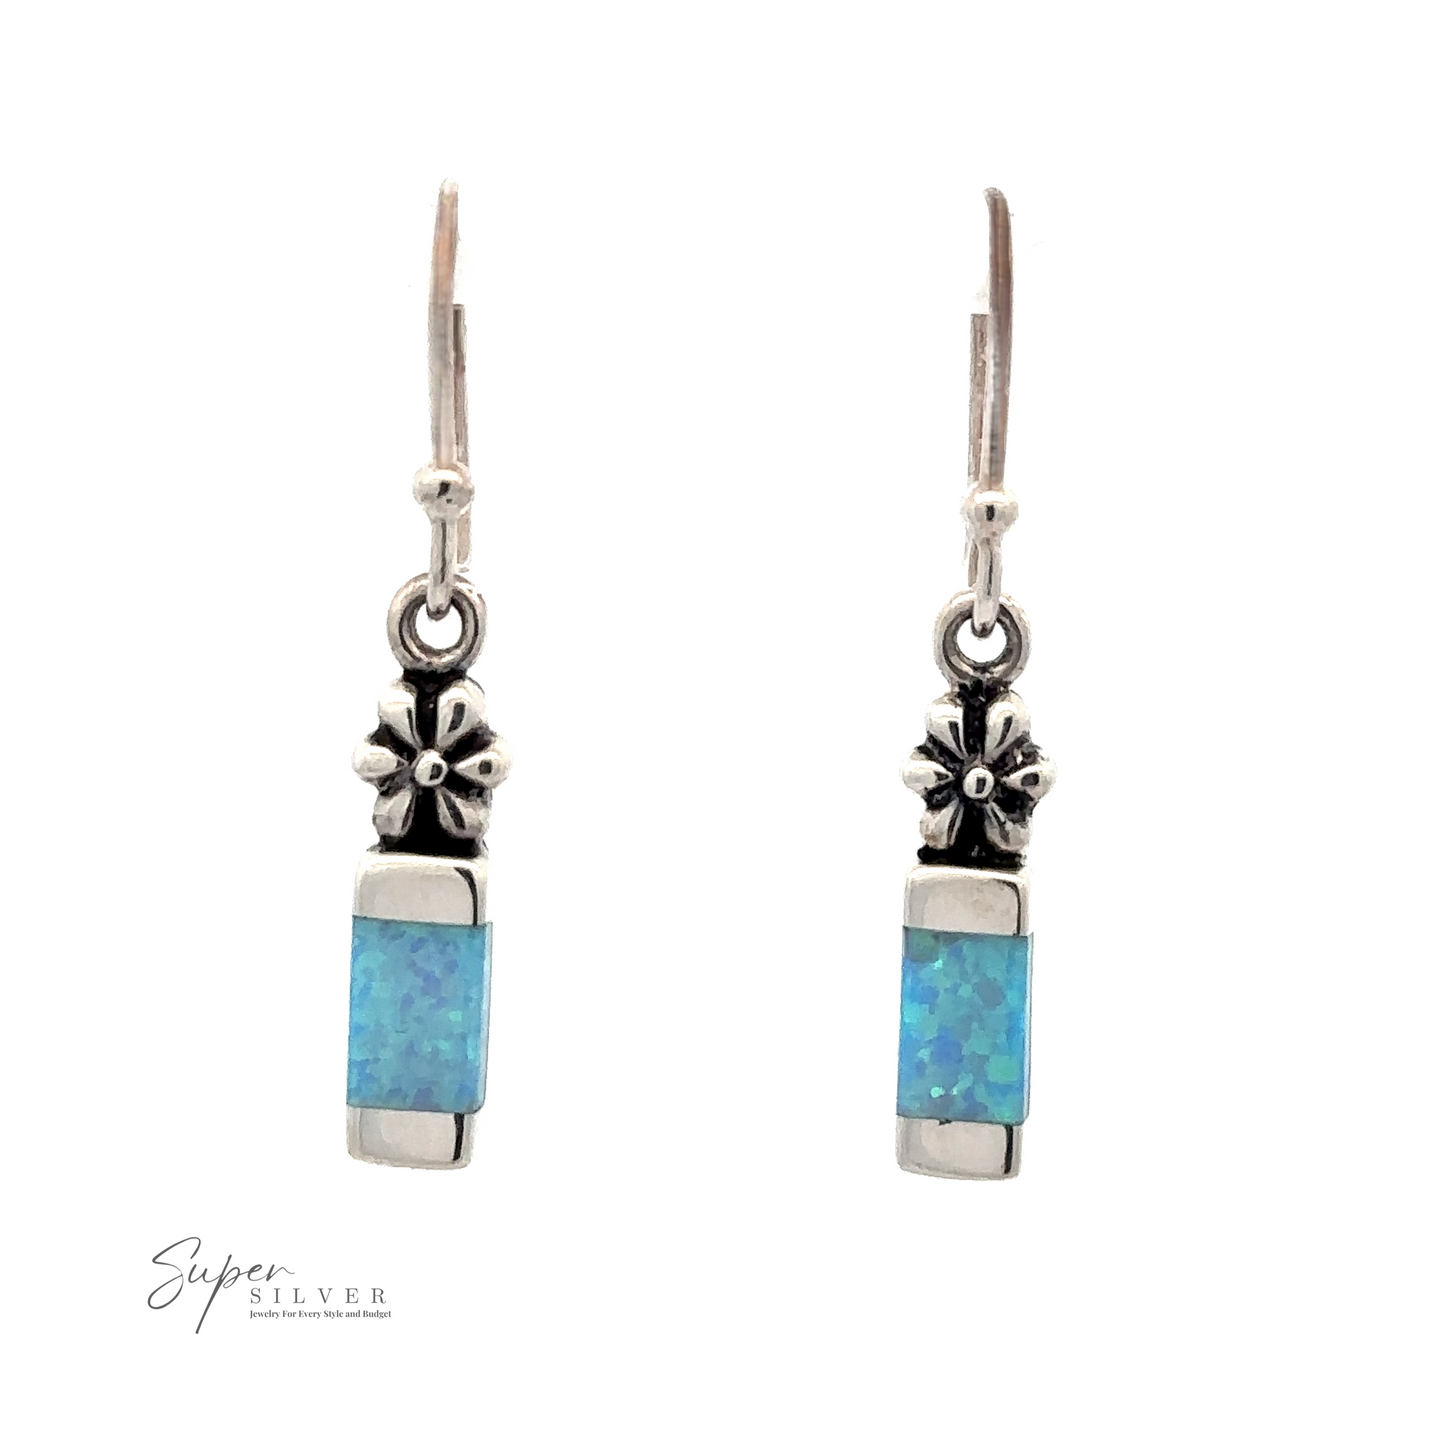 
                  
                    A pair of Blue Created Opal Earrings with Flower with small flower designs and rectangular blue stone inlays, crafted from .925 Sterling Silver. The brand name "Super Silver" is visible in the bottom left corner.
                  
                